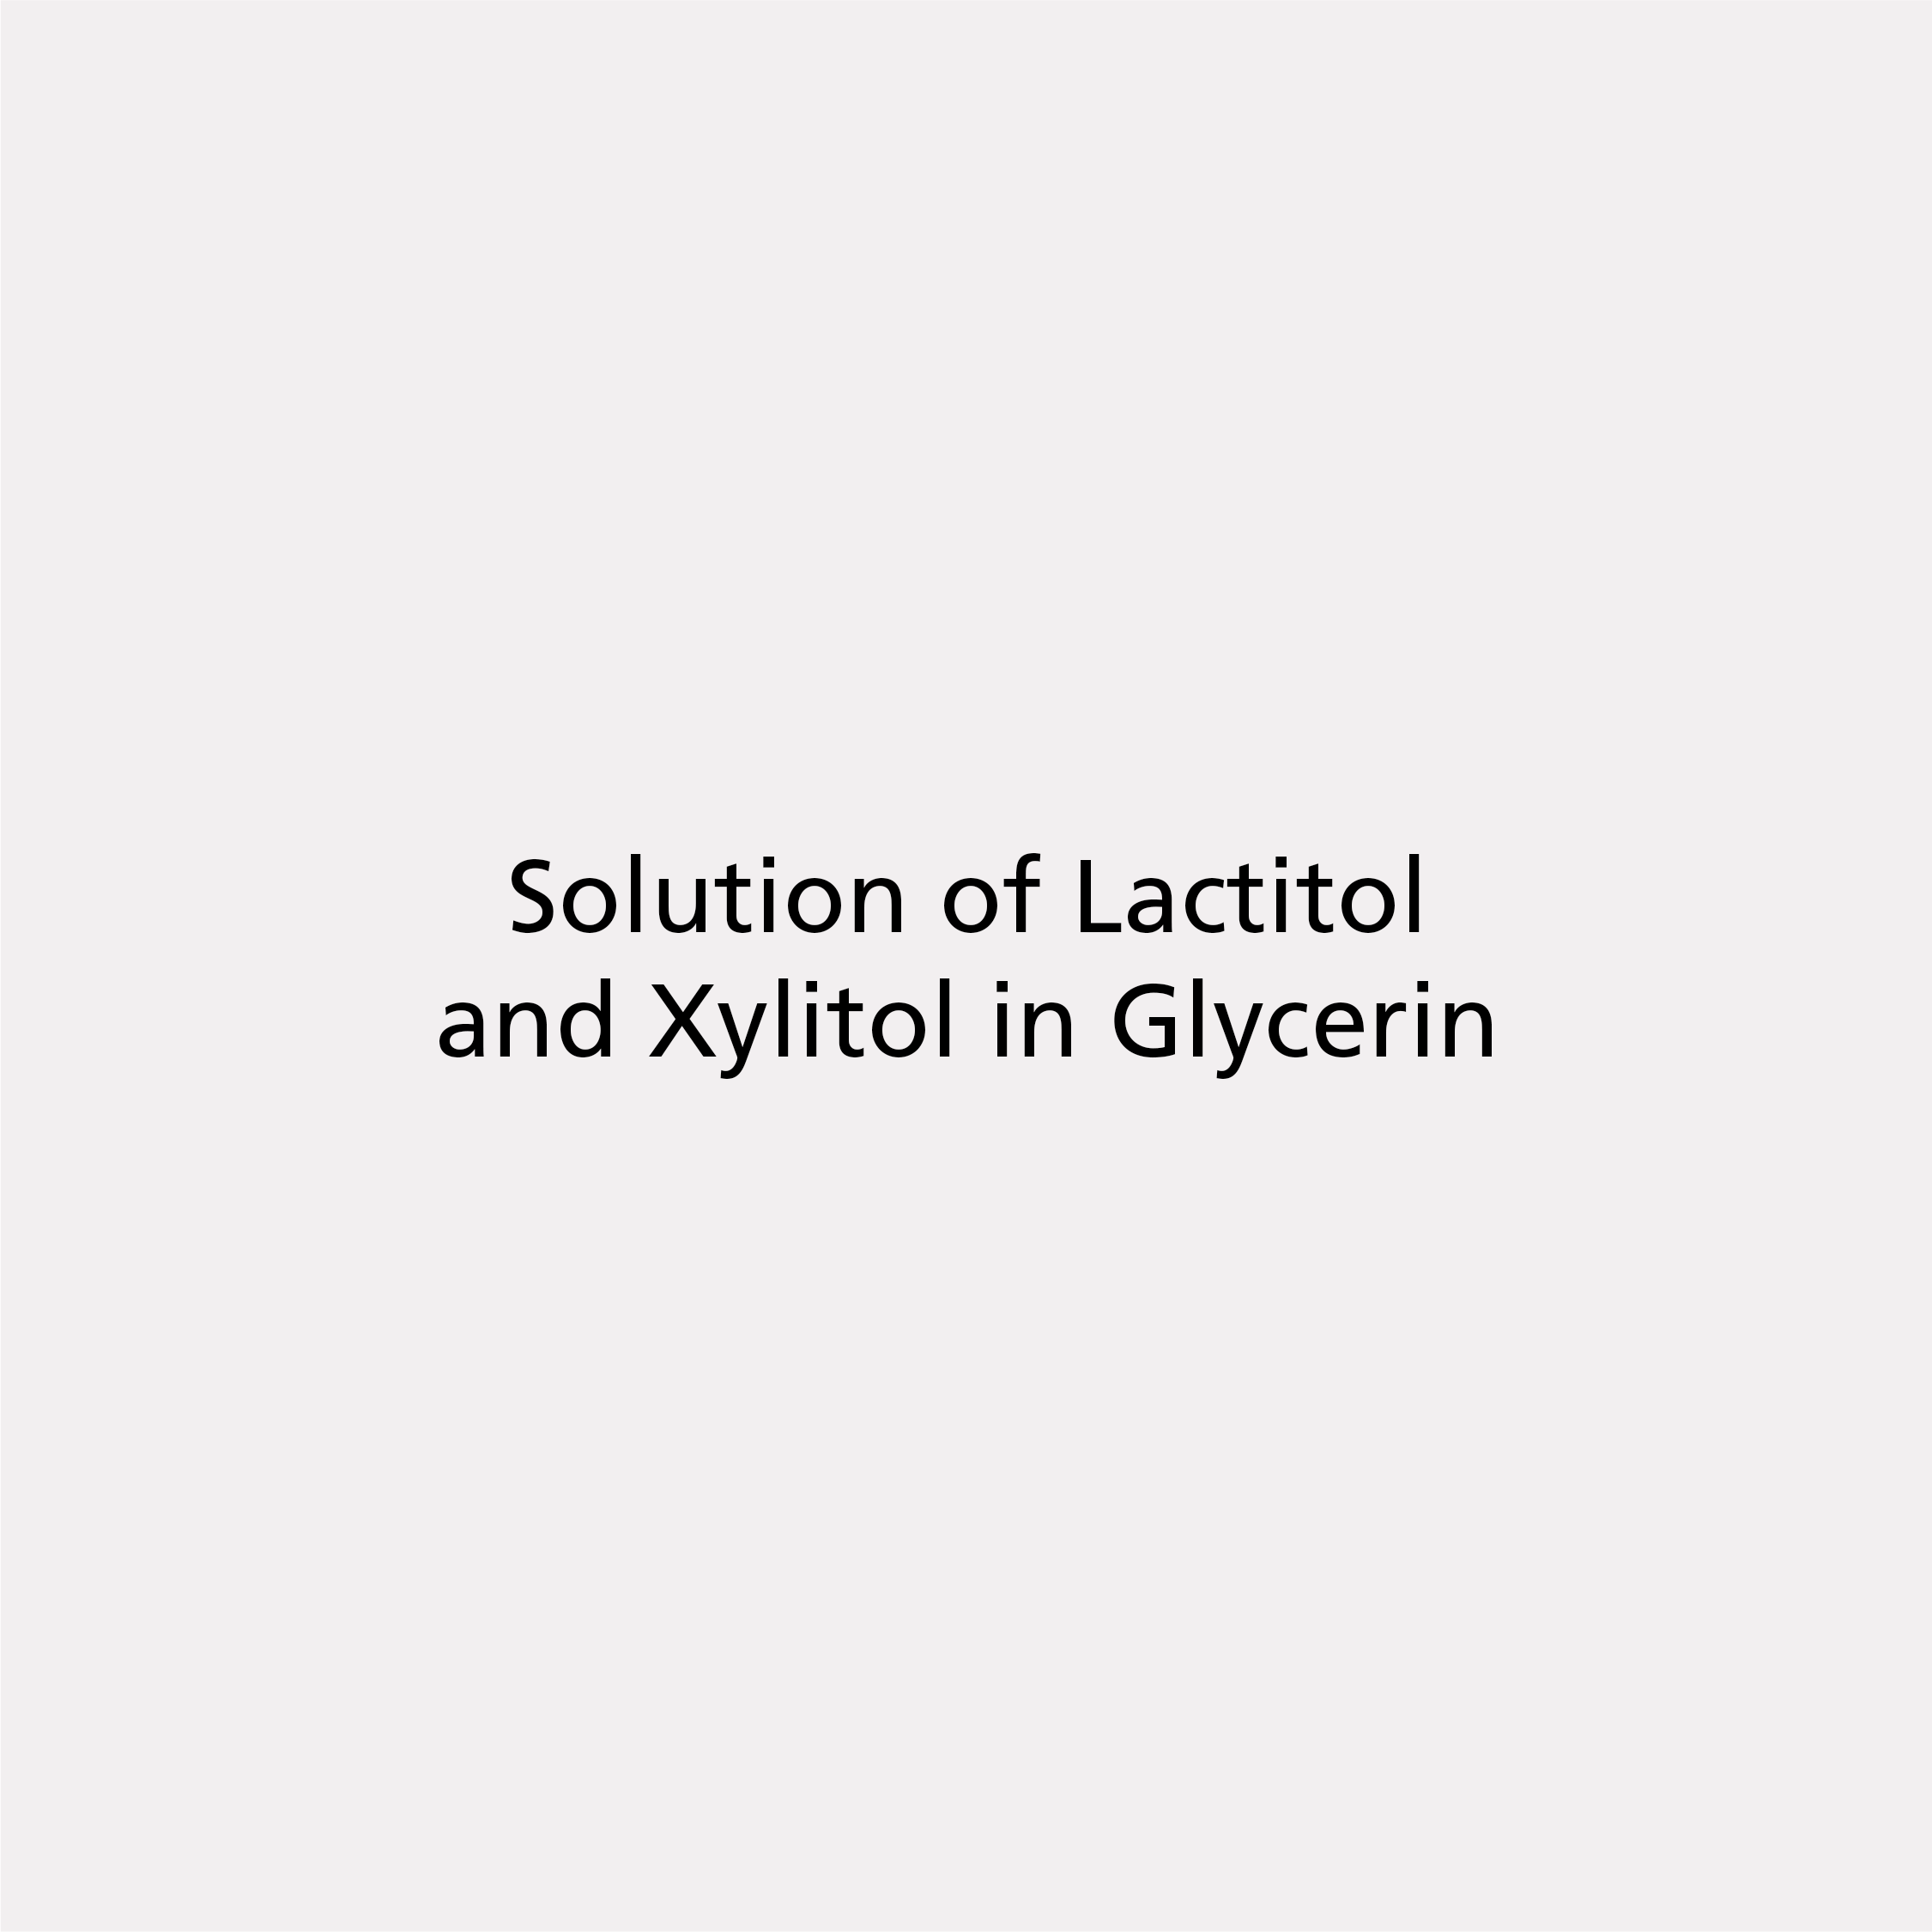 Solution of Lactitol and Xylitol in Glycerin 